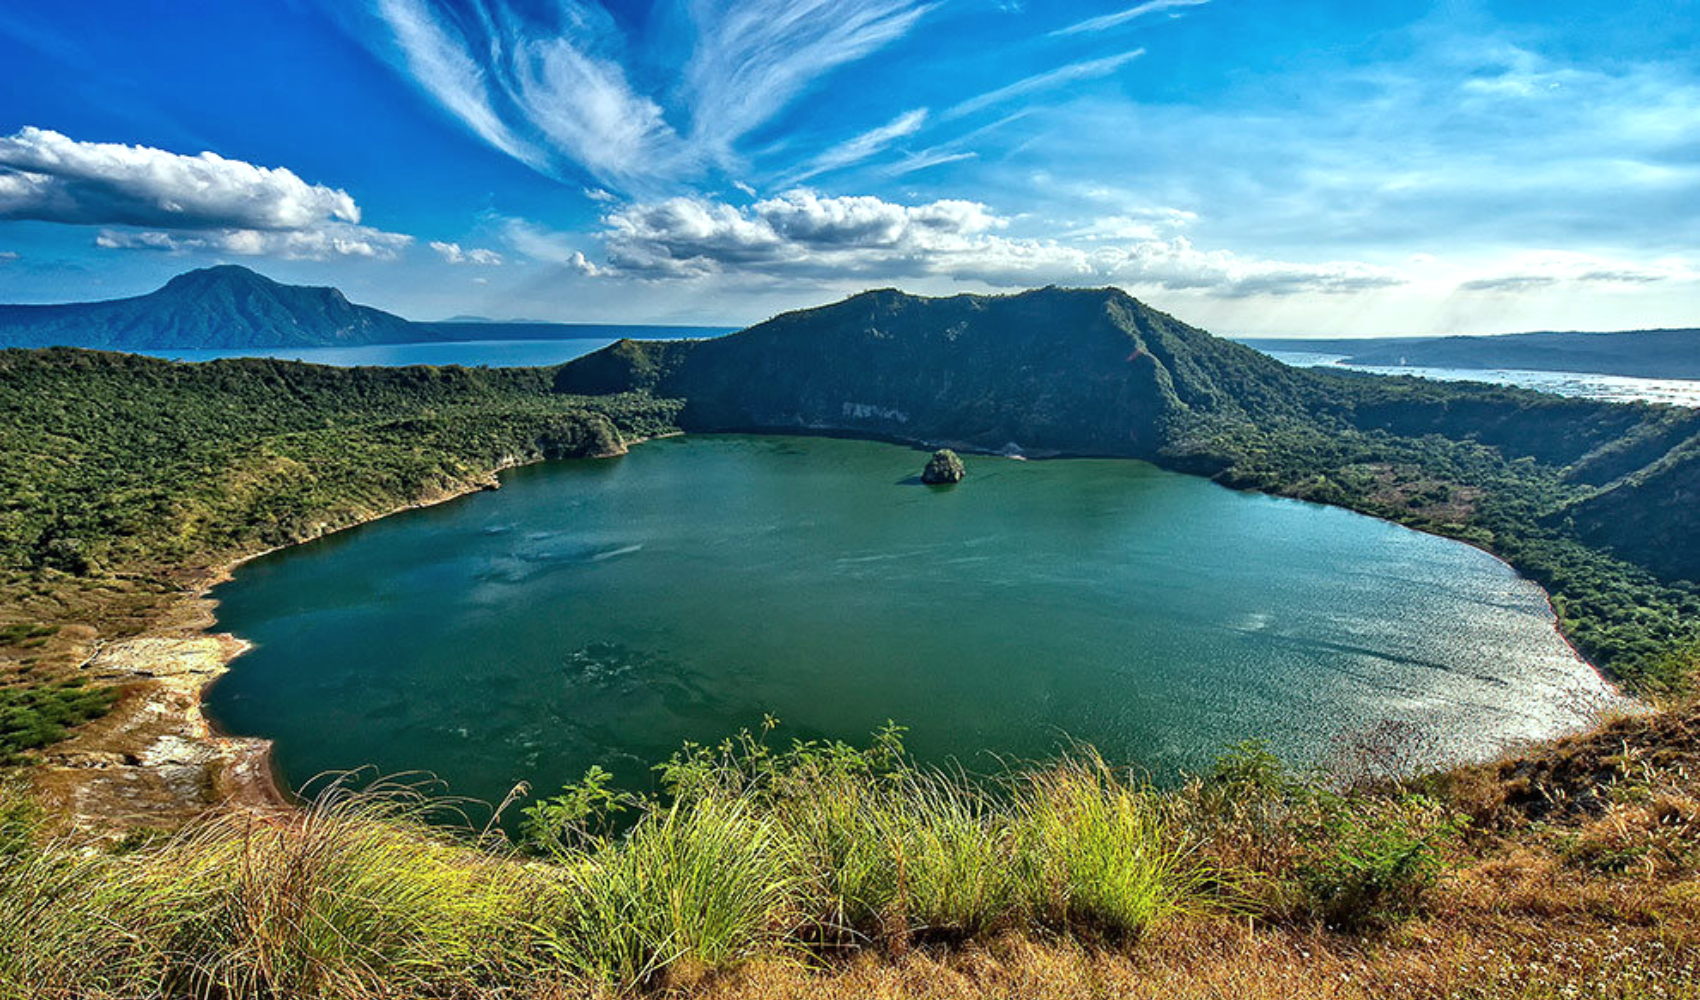  Taal  Volcano  Tour and Trek Packages